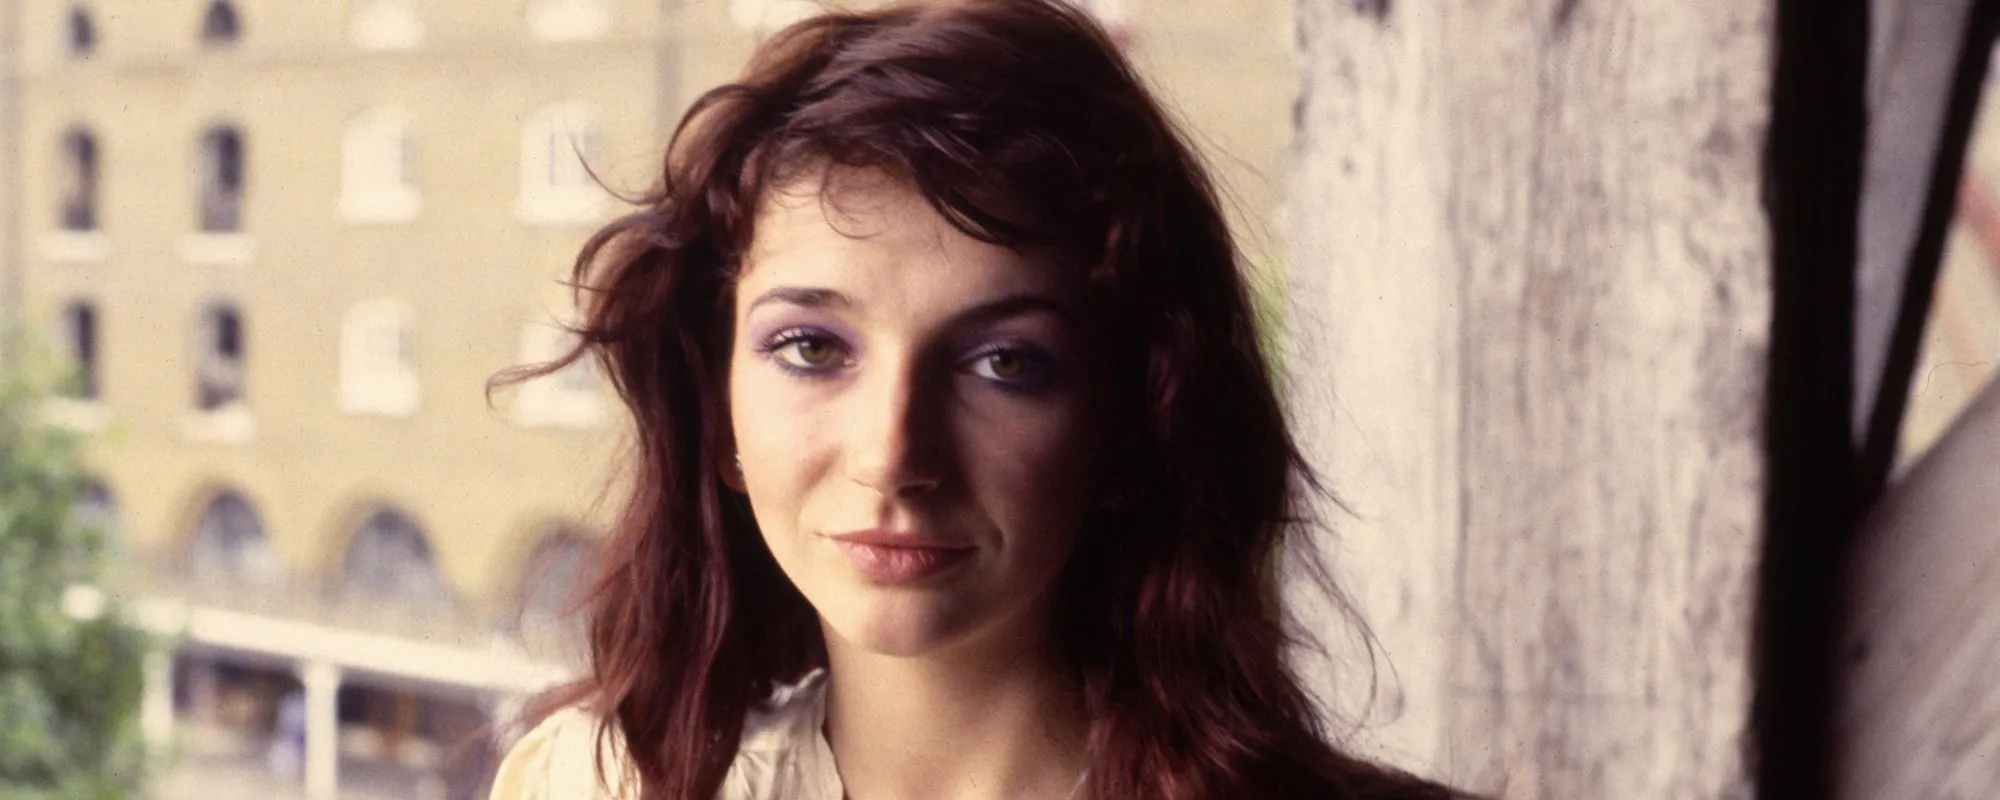 Kate Bush Reveals She’s ‘Blown Away’ by Spotify Success of ‘Running Up That Hill’